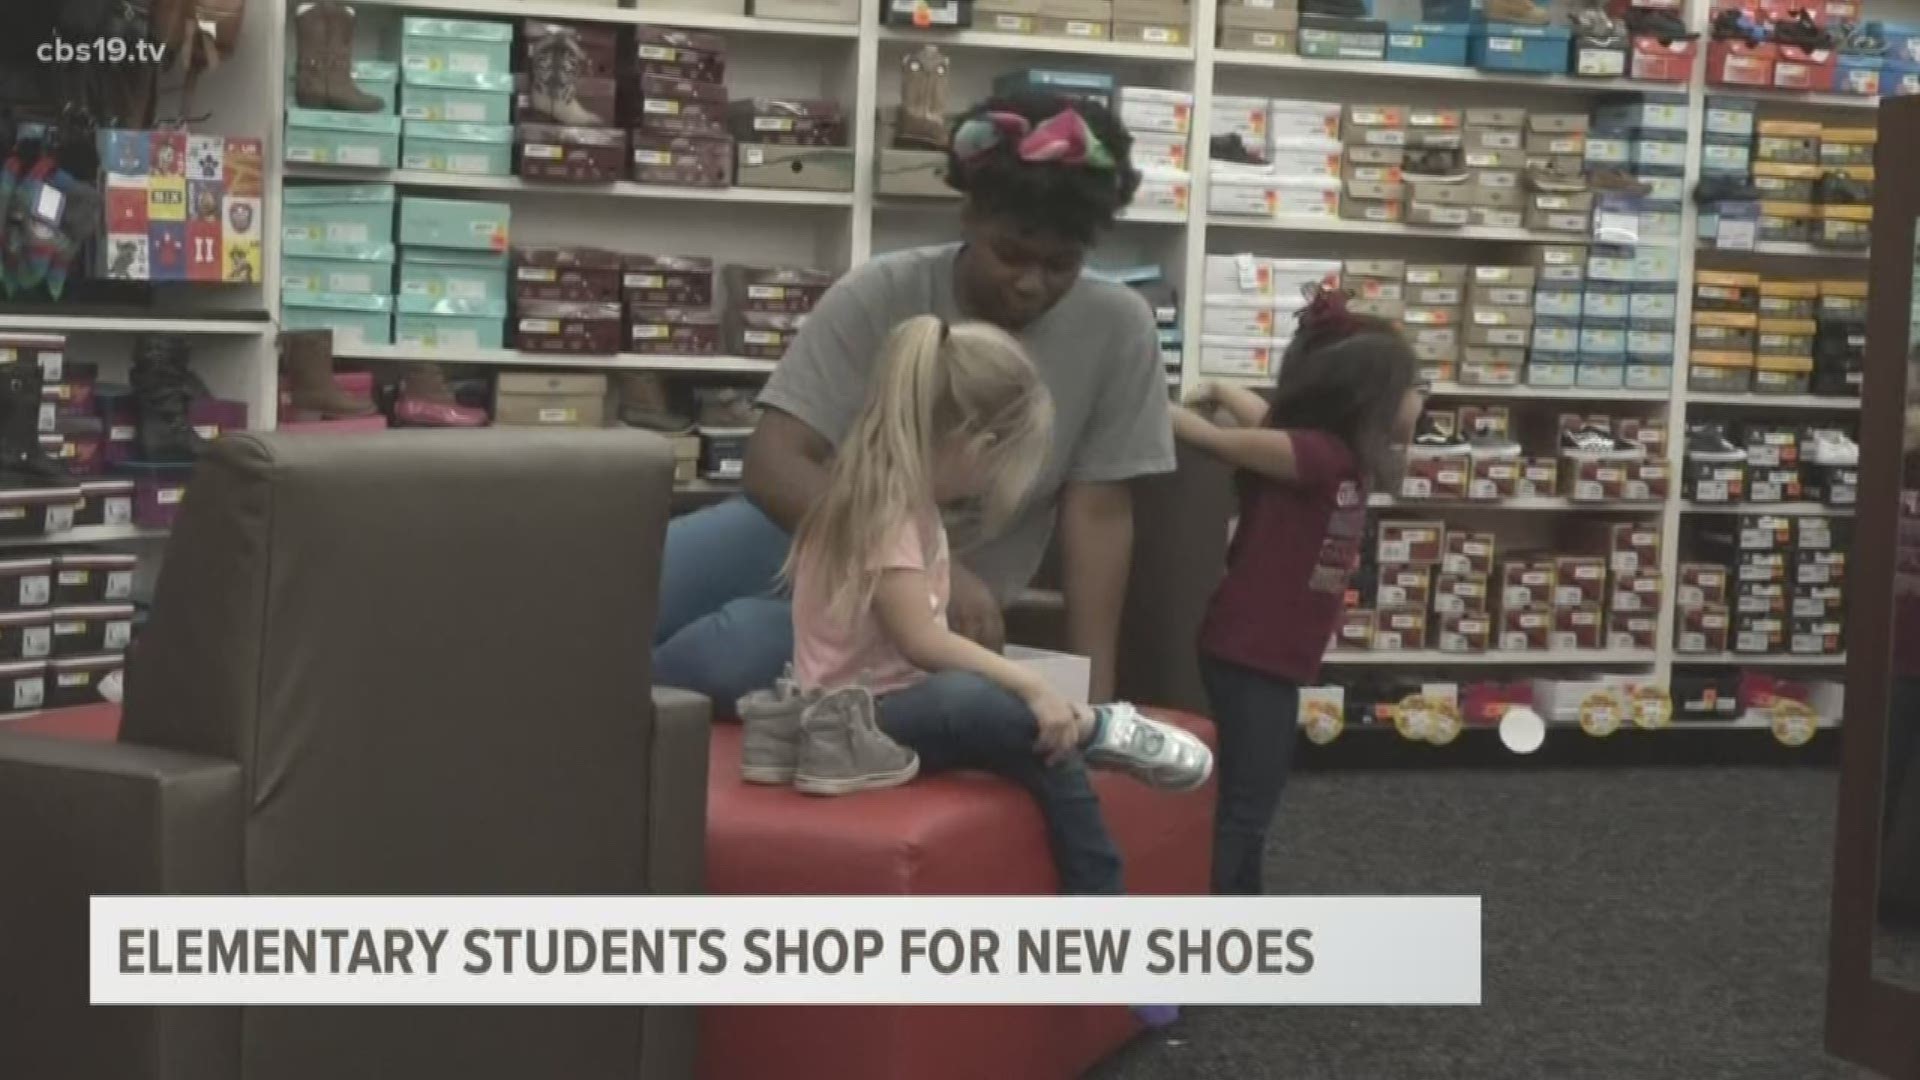 Elementary students shop for new shoes